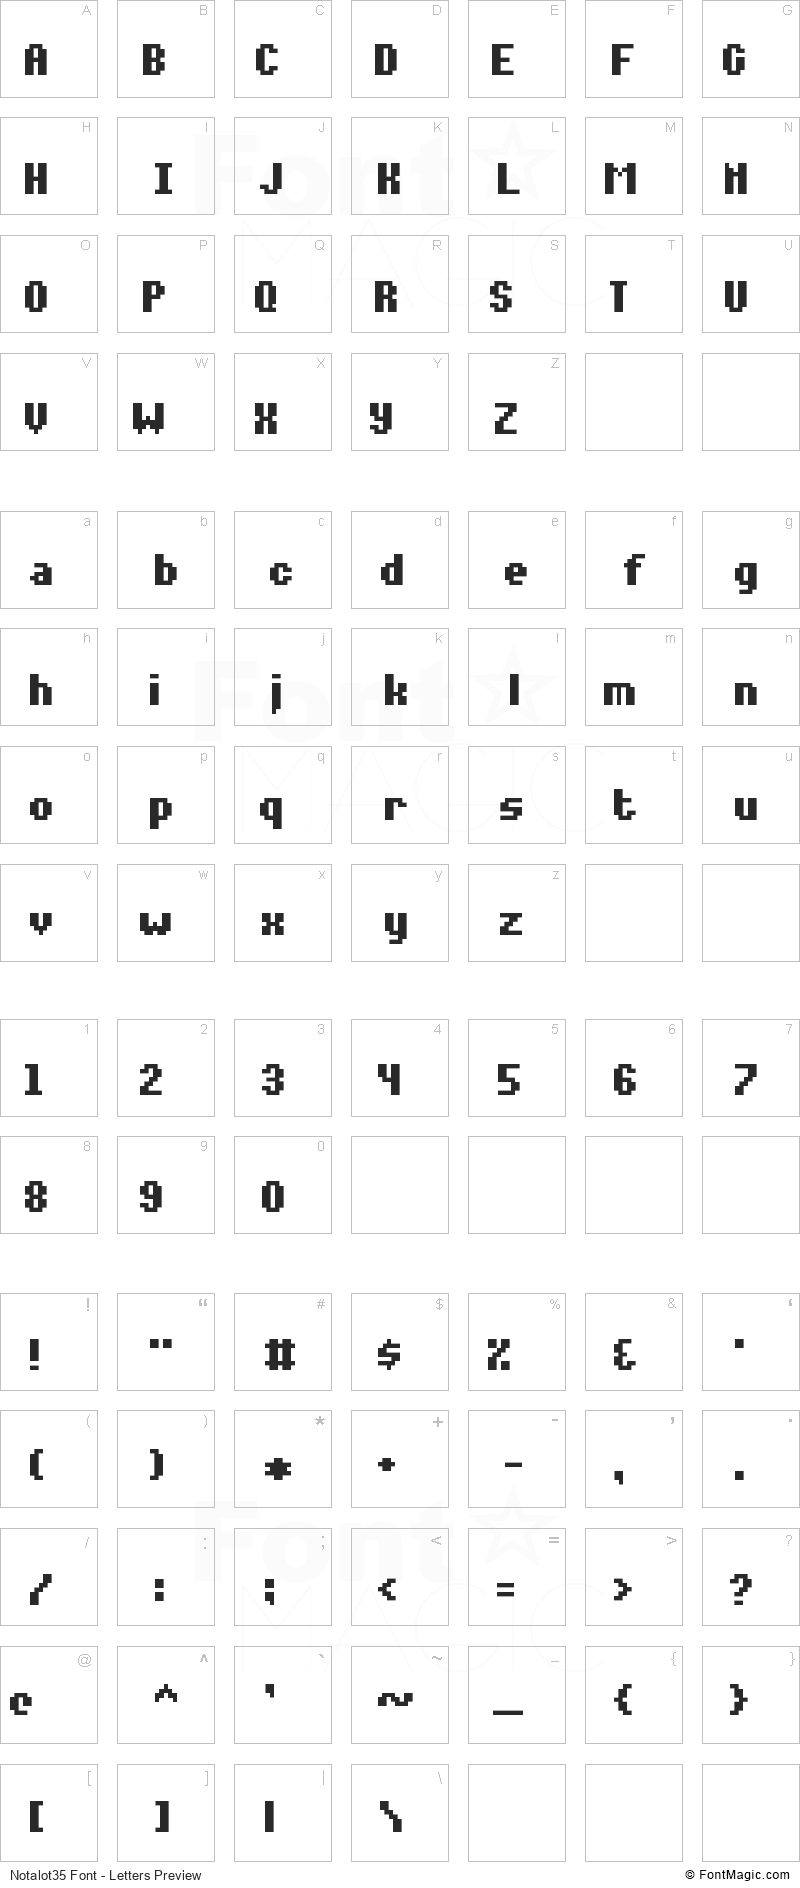 Notalot35 Font - All Latters Preview Chart